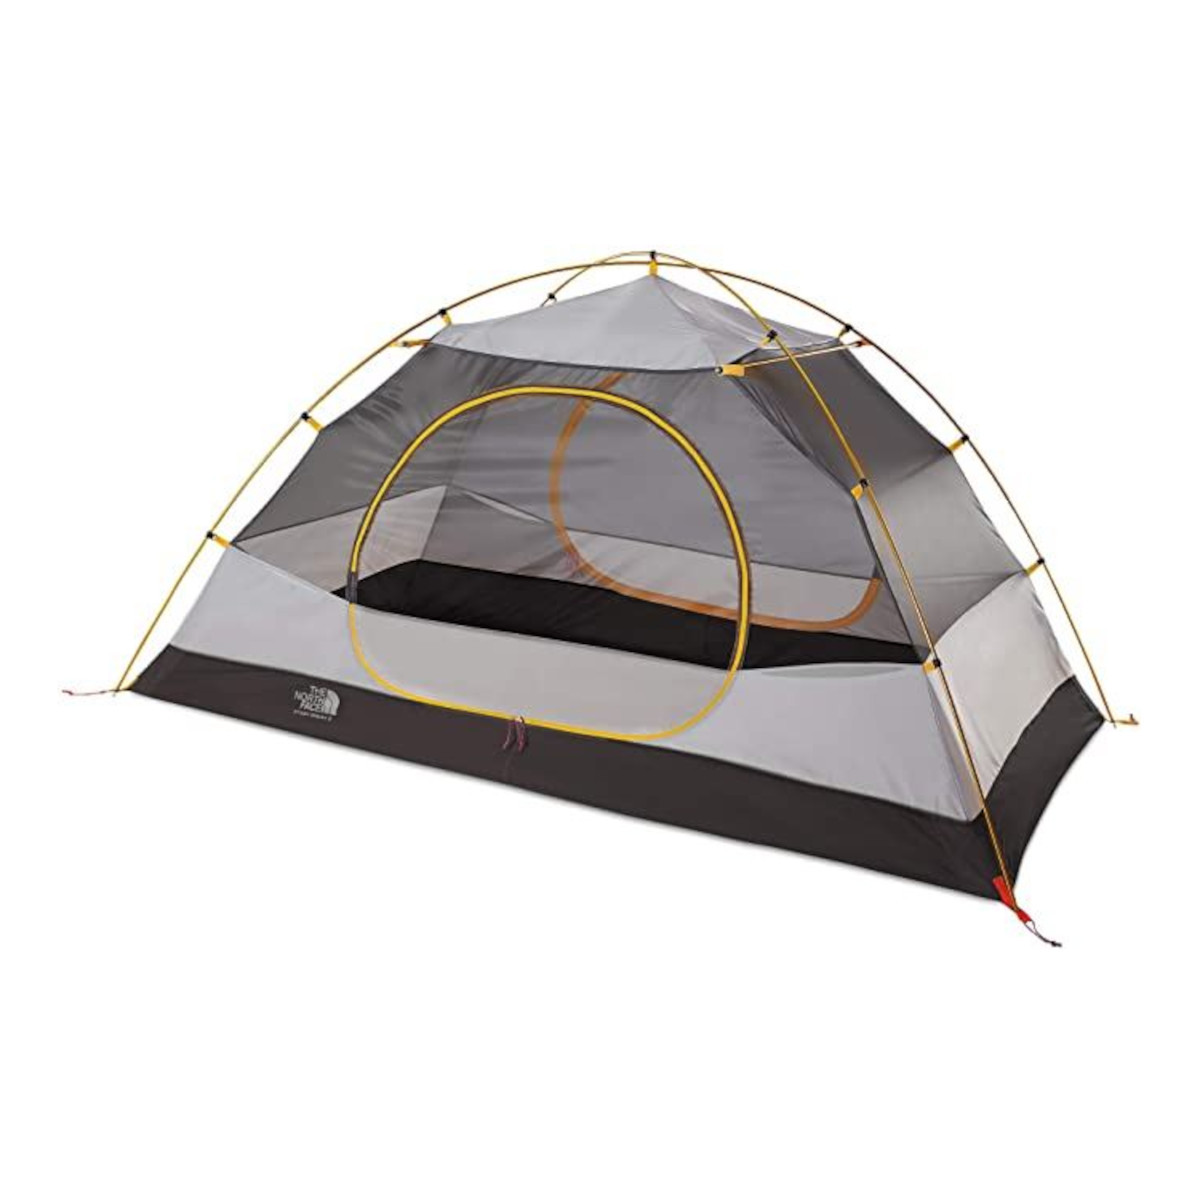 Backcountry North – City, MI | The North Face Stormbreak 2 Person Tent